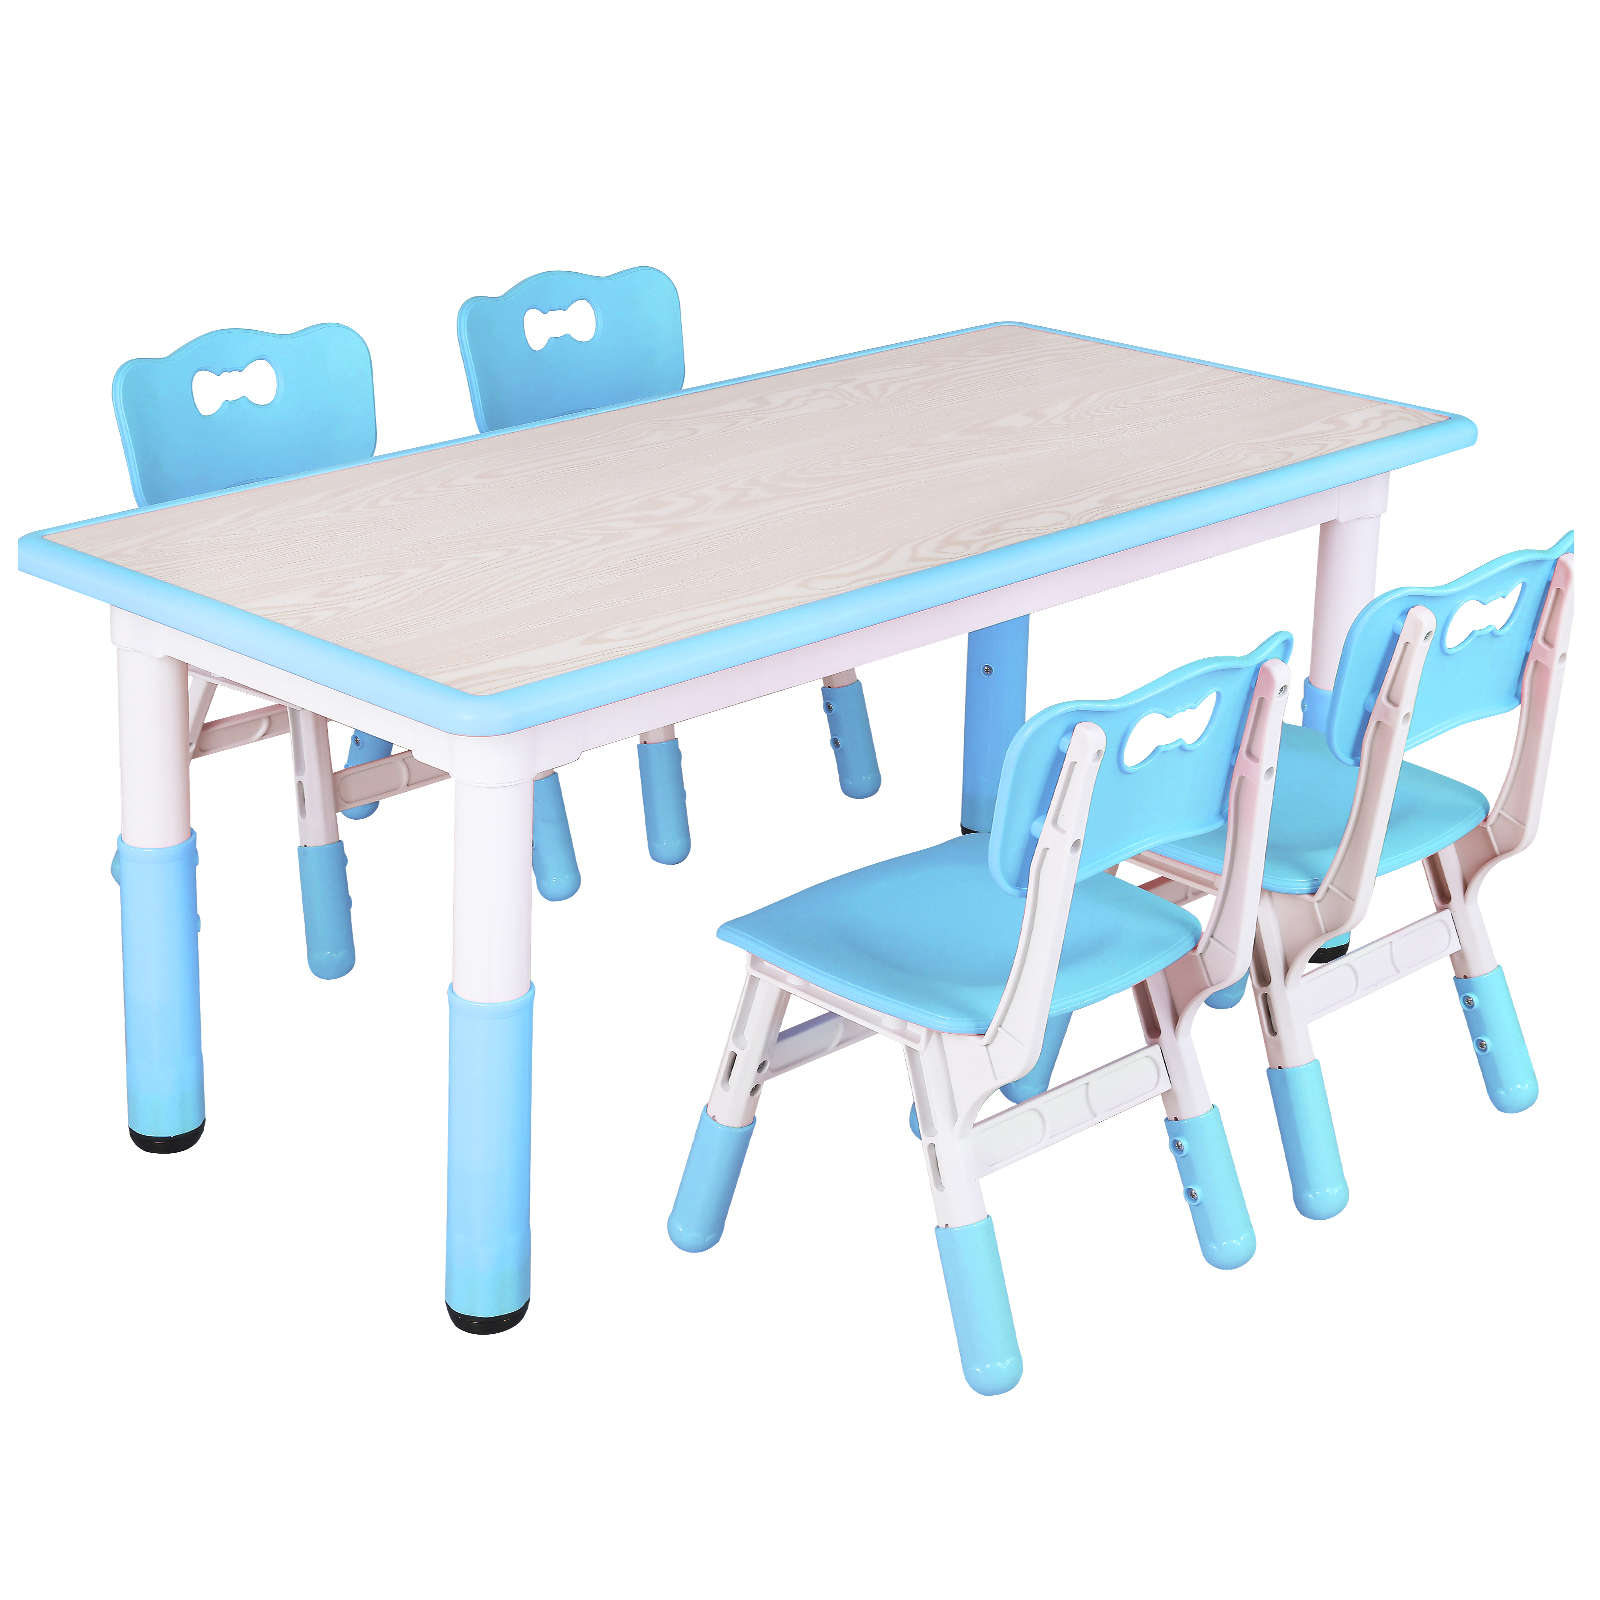 TMS Hayden Kids 3-Piece Table and Chair Set, Multiple Colors - Walmart.com